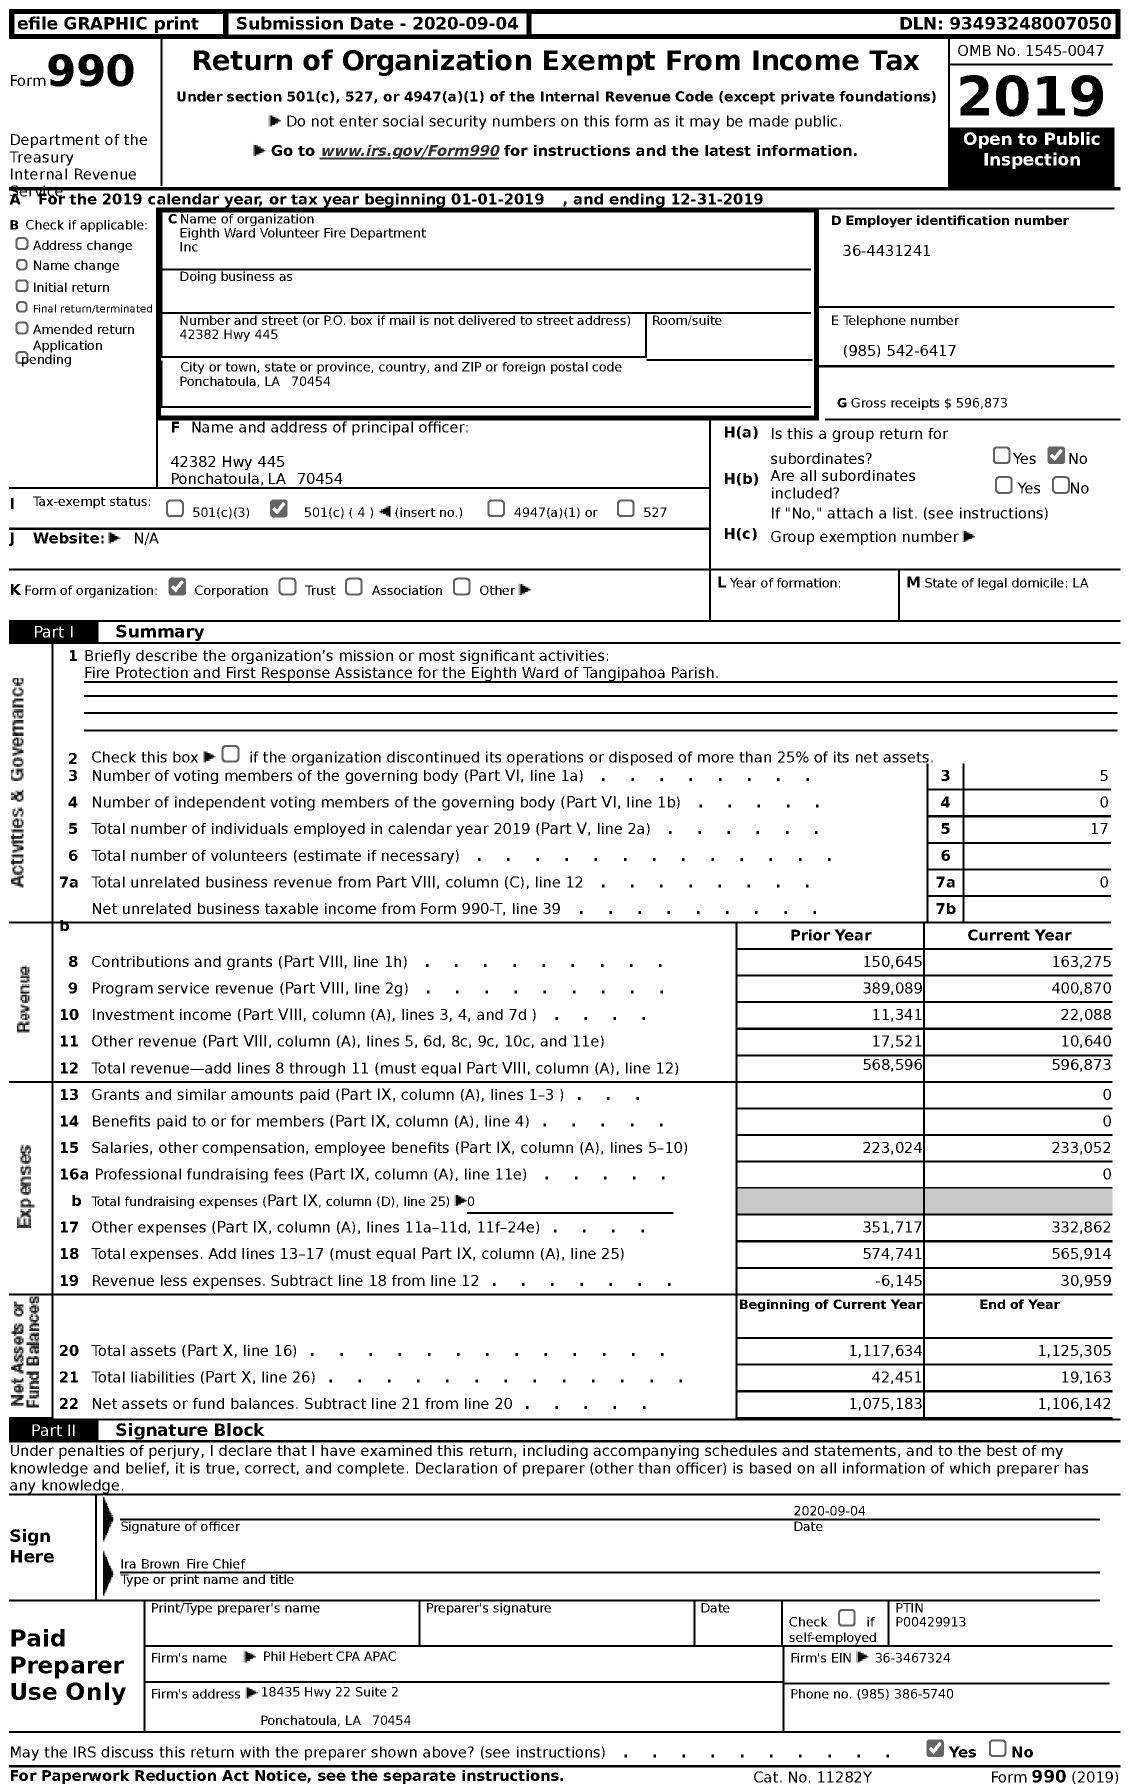 Image of first page of 2019 Form 990 for Eighth Ward Volunteer Fire Department